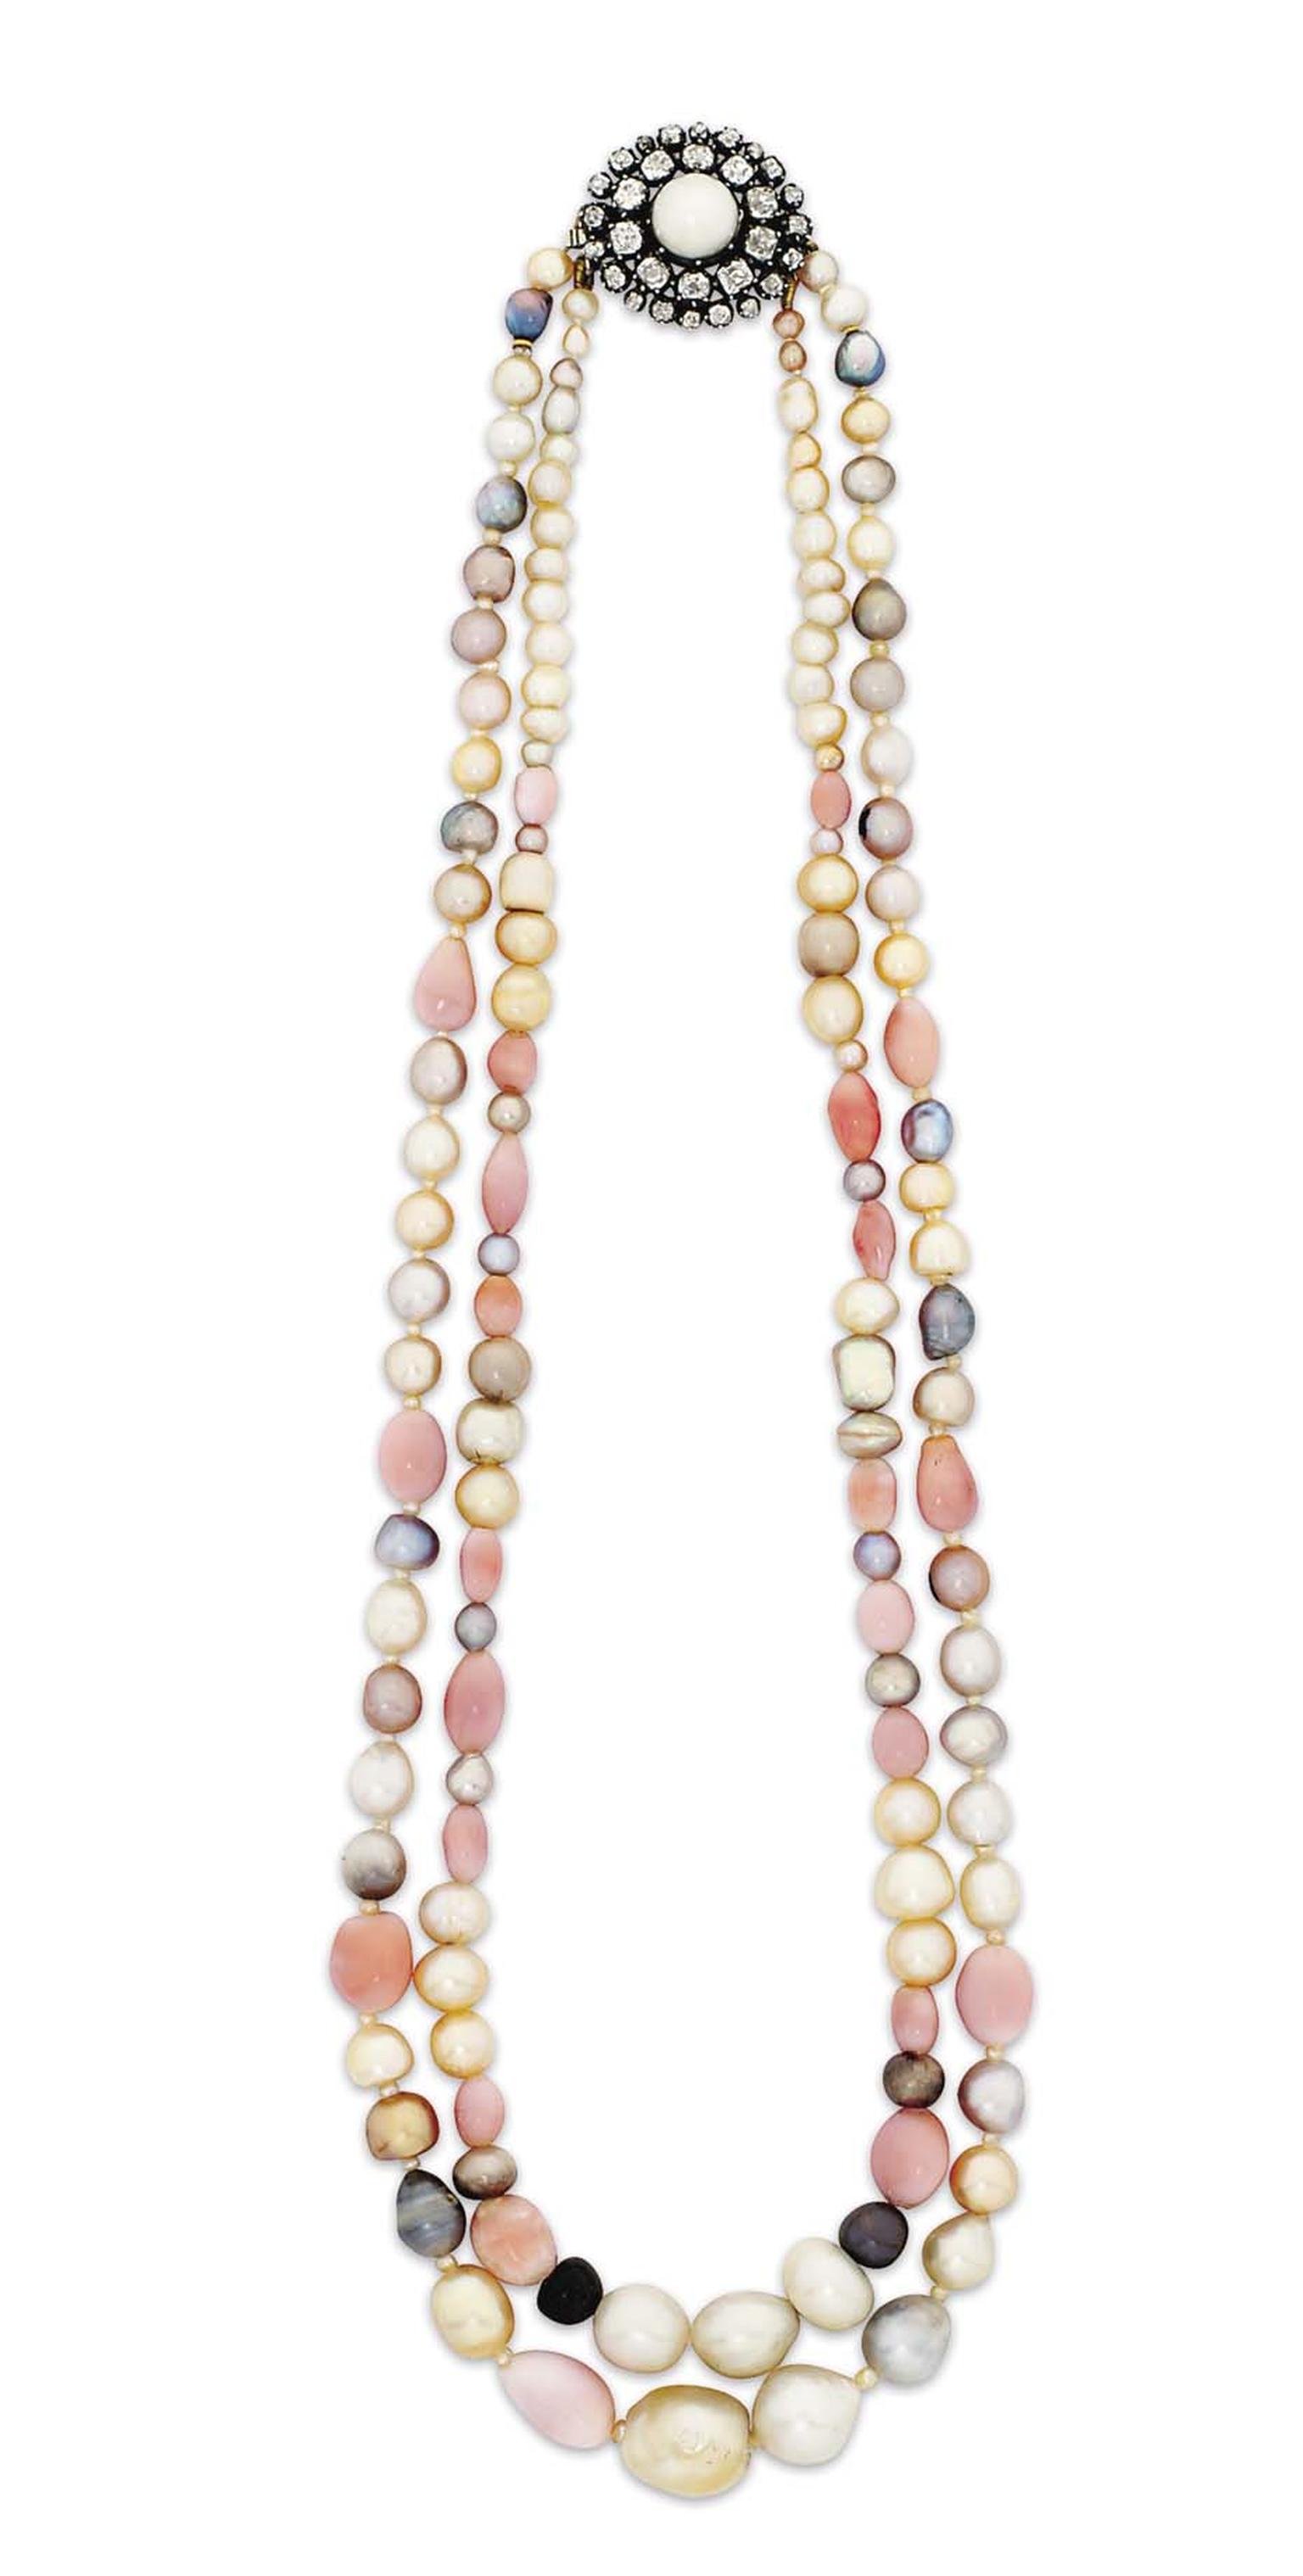 Lot 334 is not the most expensive or even the most beautiful, but it is intriguing: a late 19th century conch pearl necklace with a mix of natural and nubby conch pearls sold for £11,875, (estimate: £3,000-5,000).